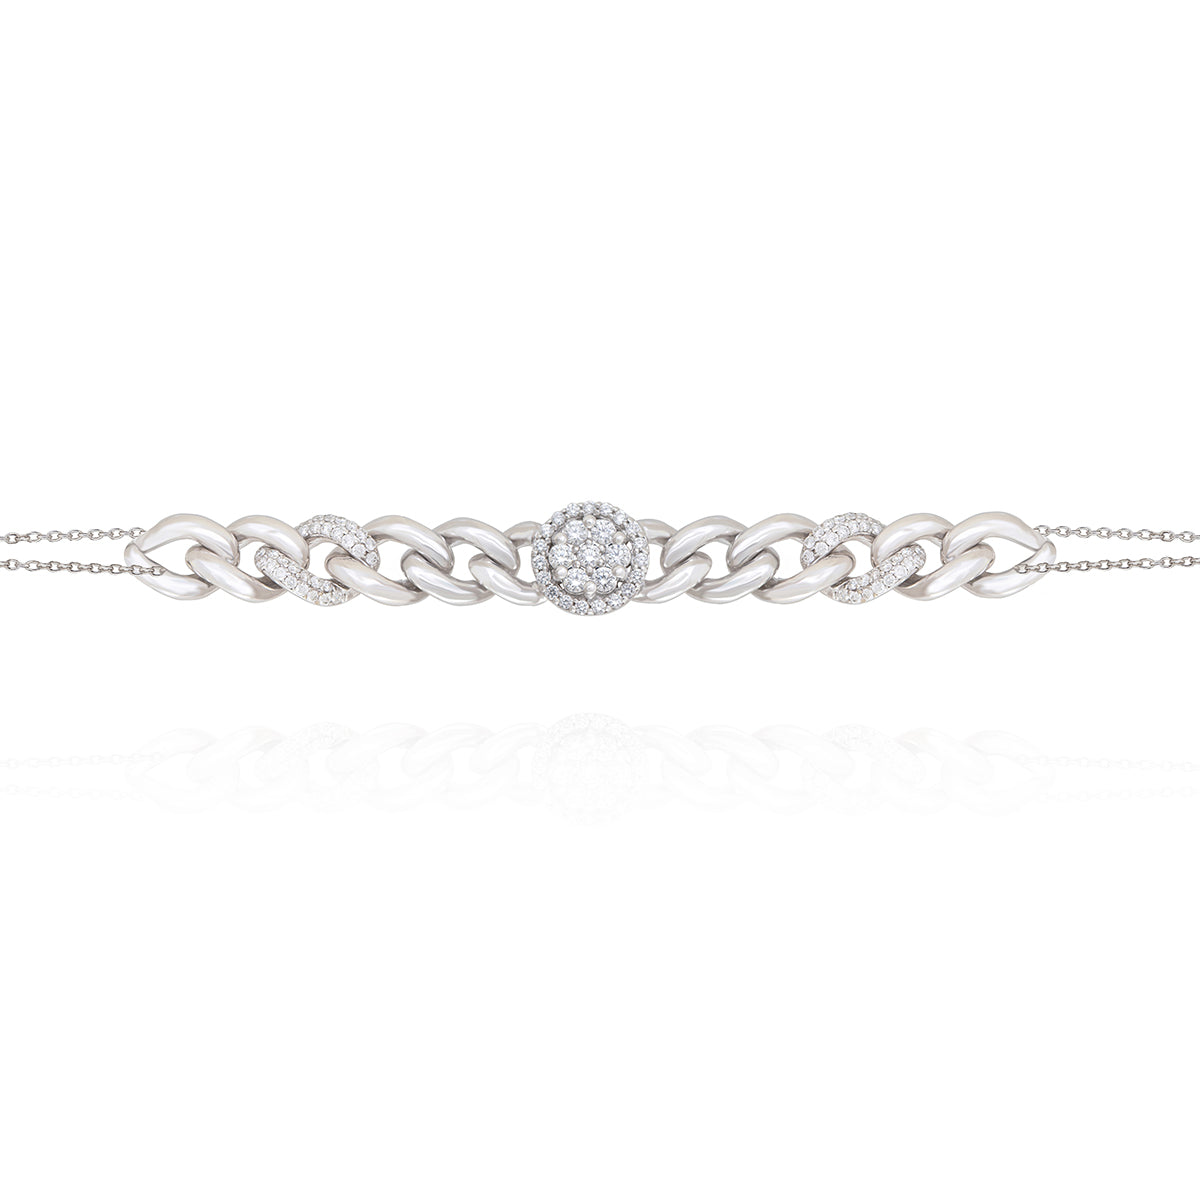 White Gold Bracelet with a Diamond Touch